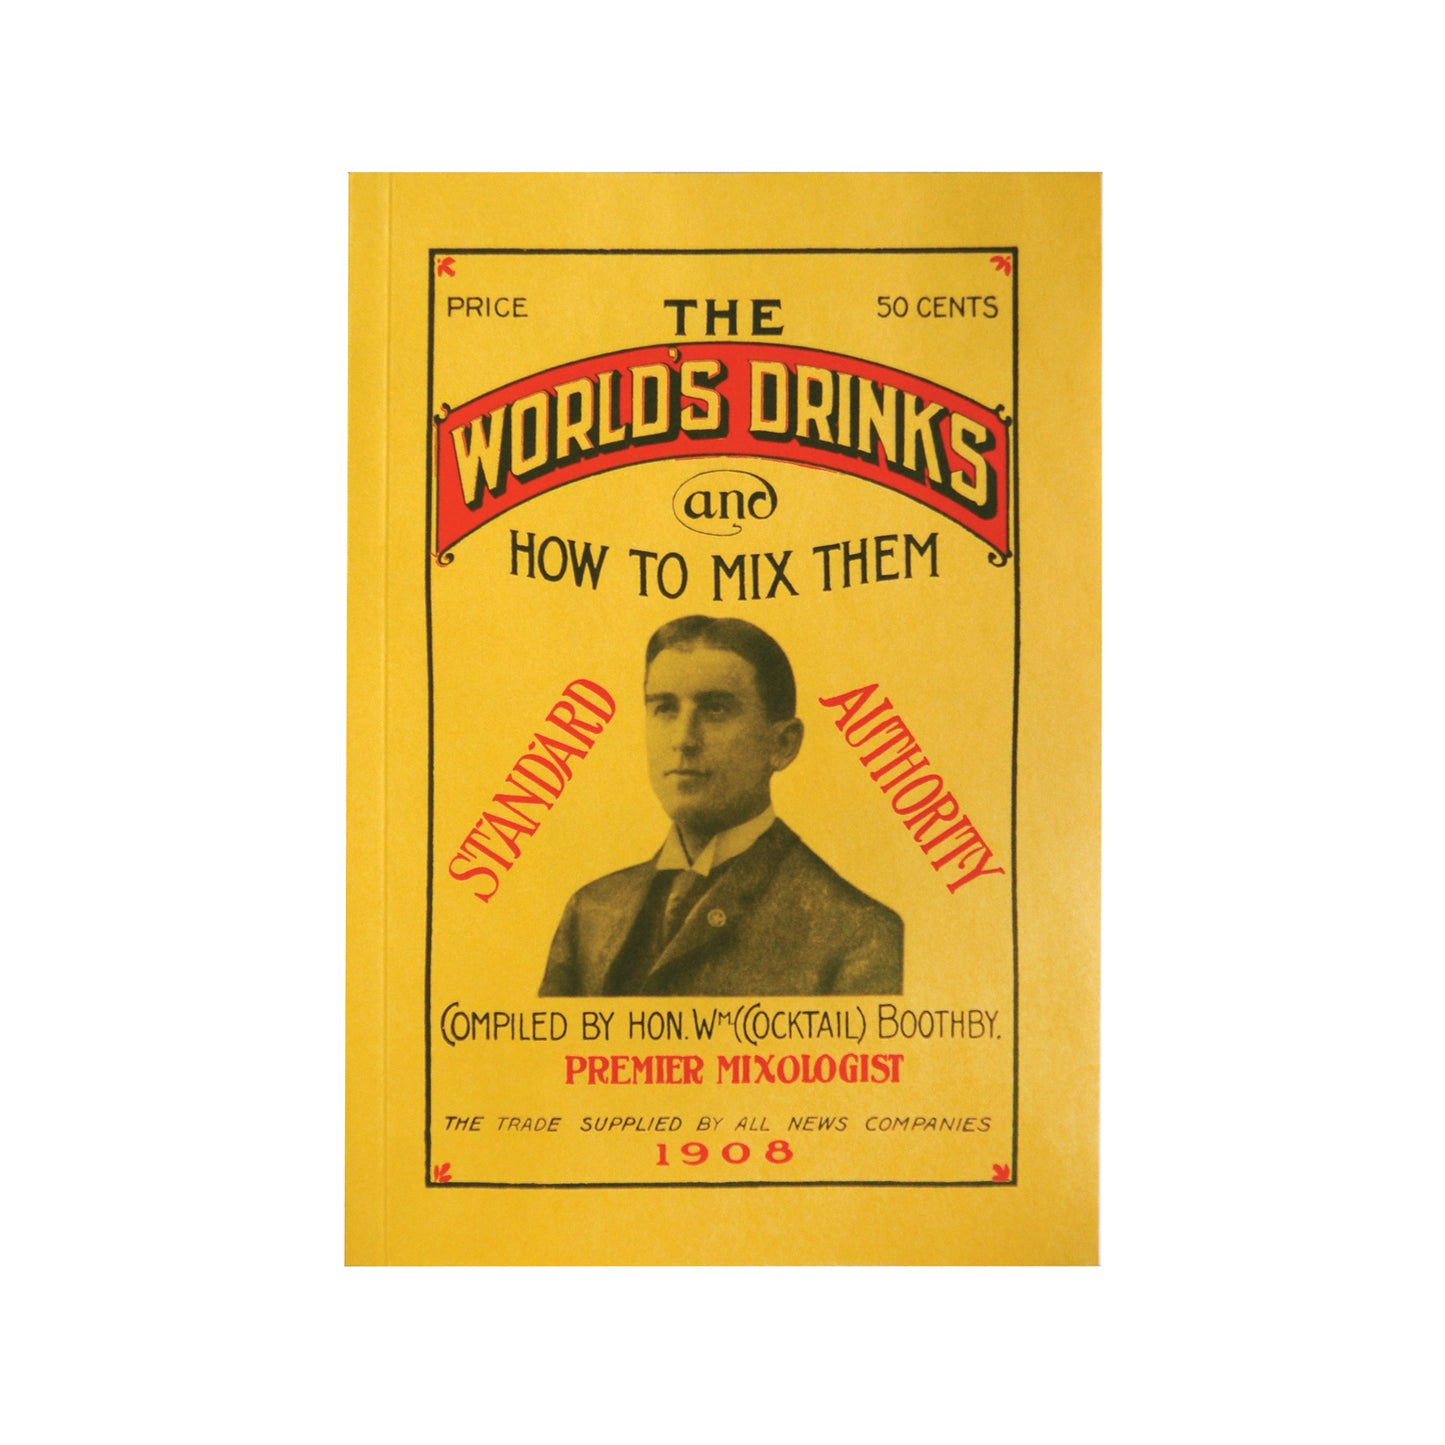 THE WORLD’S DRINKS AND HOW TO MIX THEM BY WILLIAM BOOTHBY